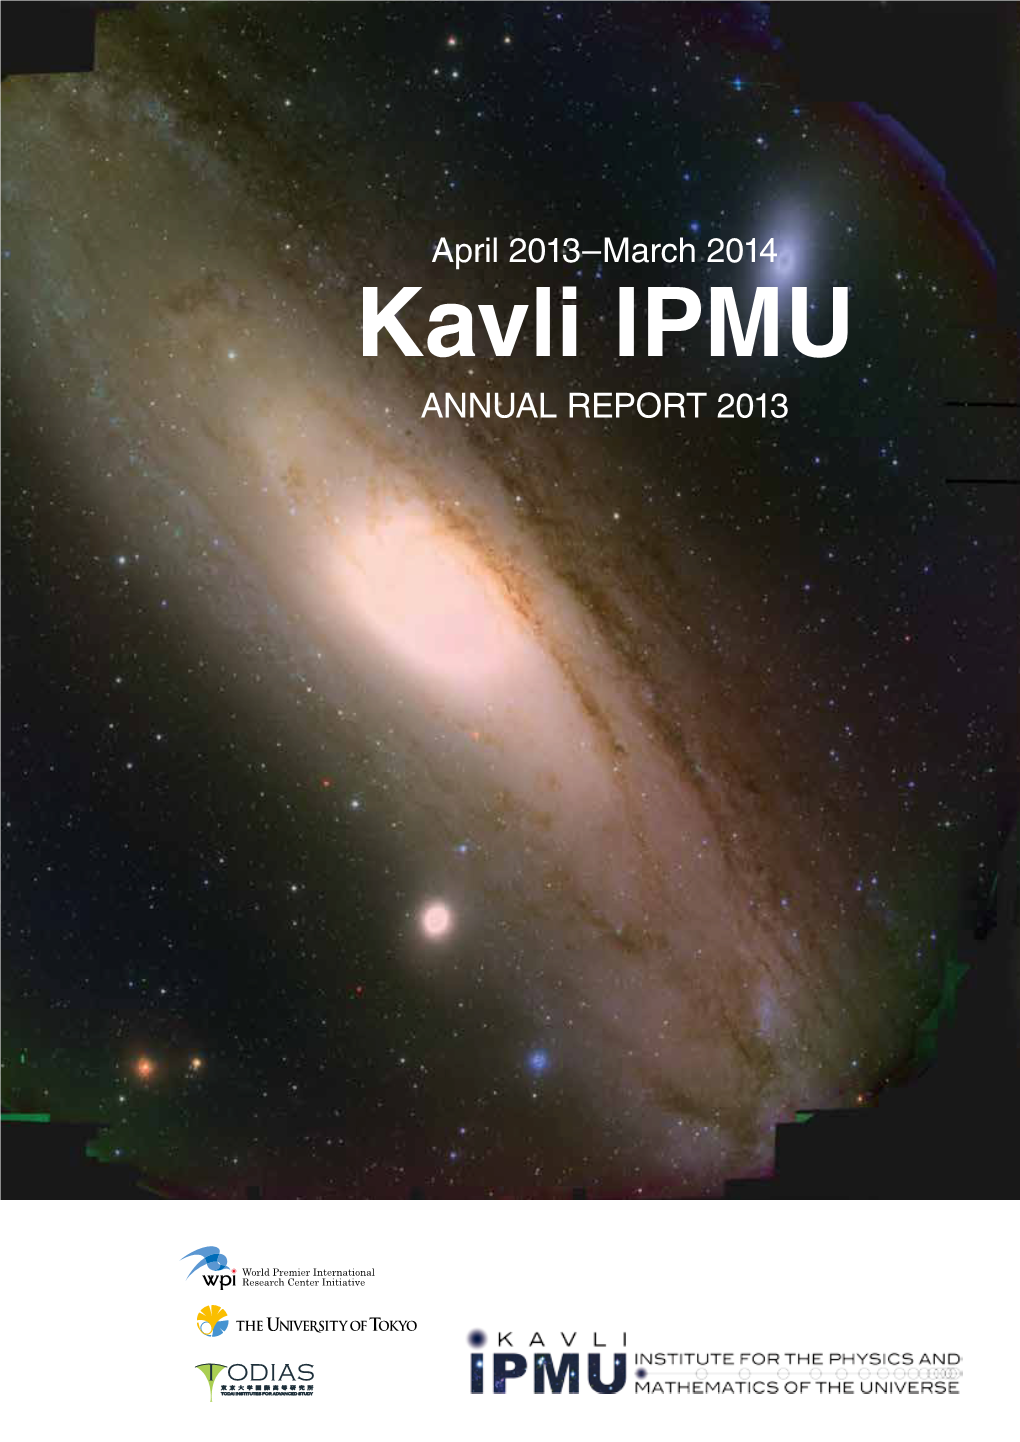 The Kavli IPMU Focus Week Workshop on Cosmology with Small Scale Structure